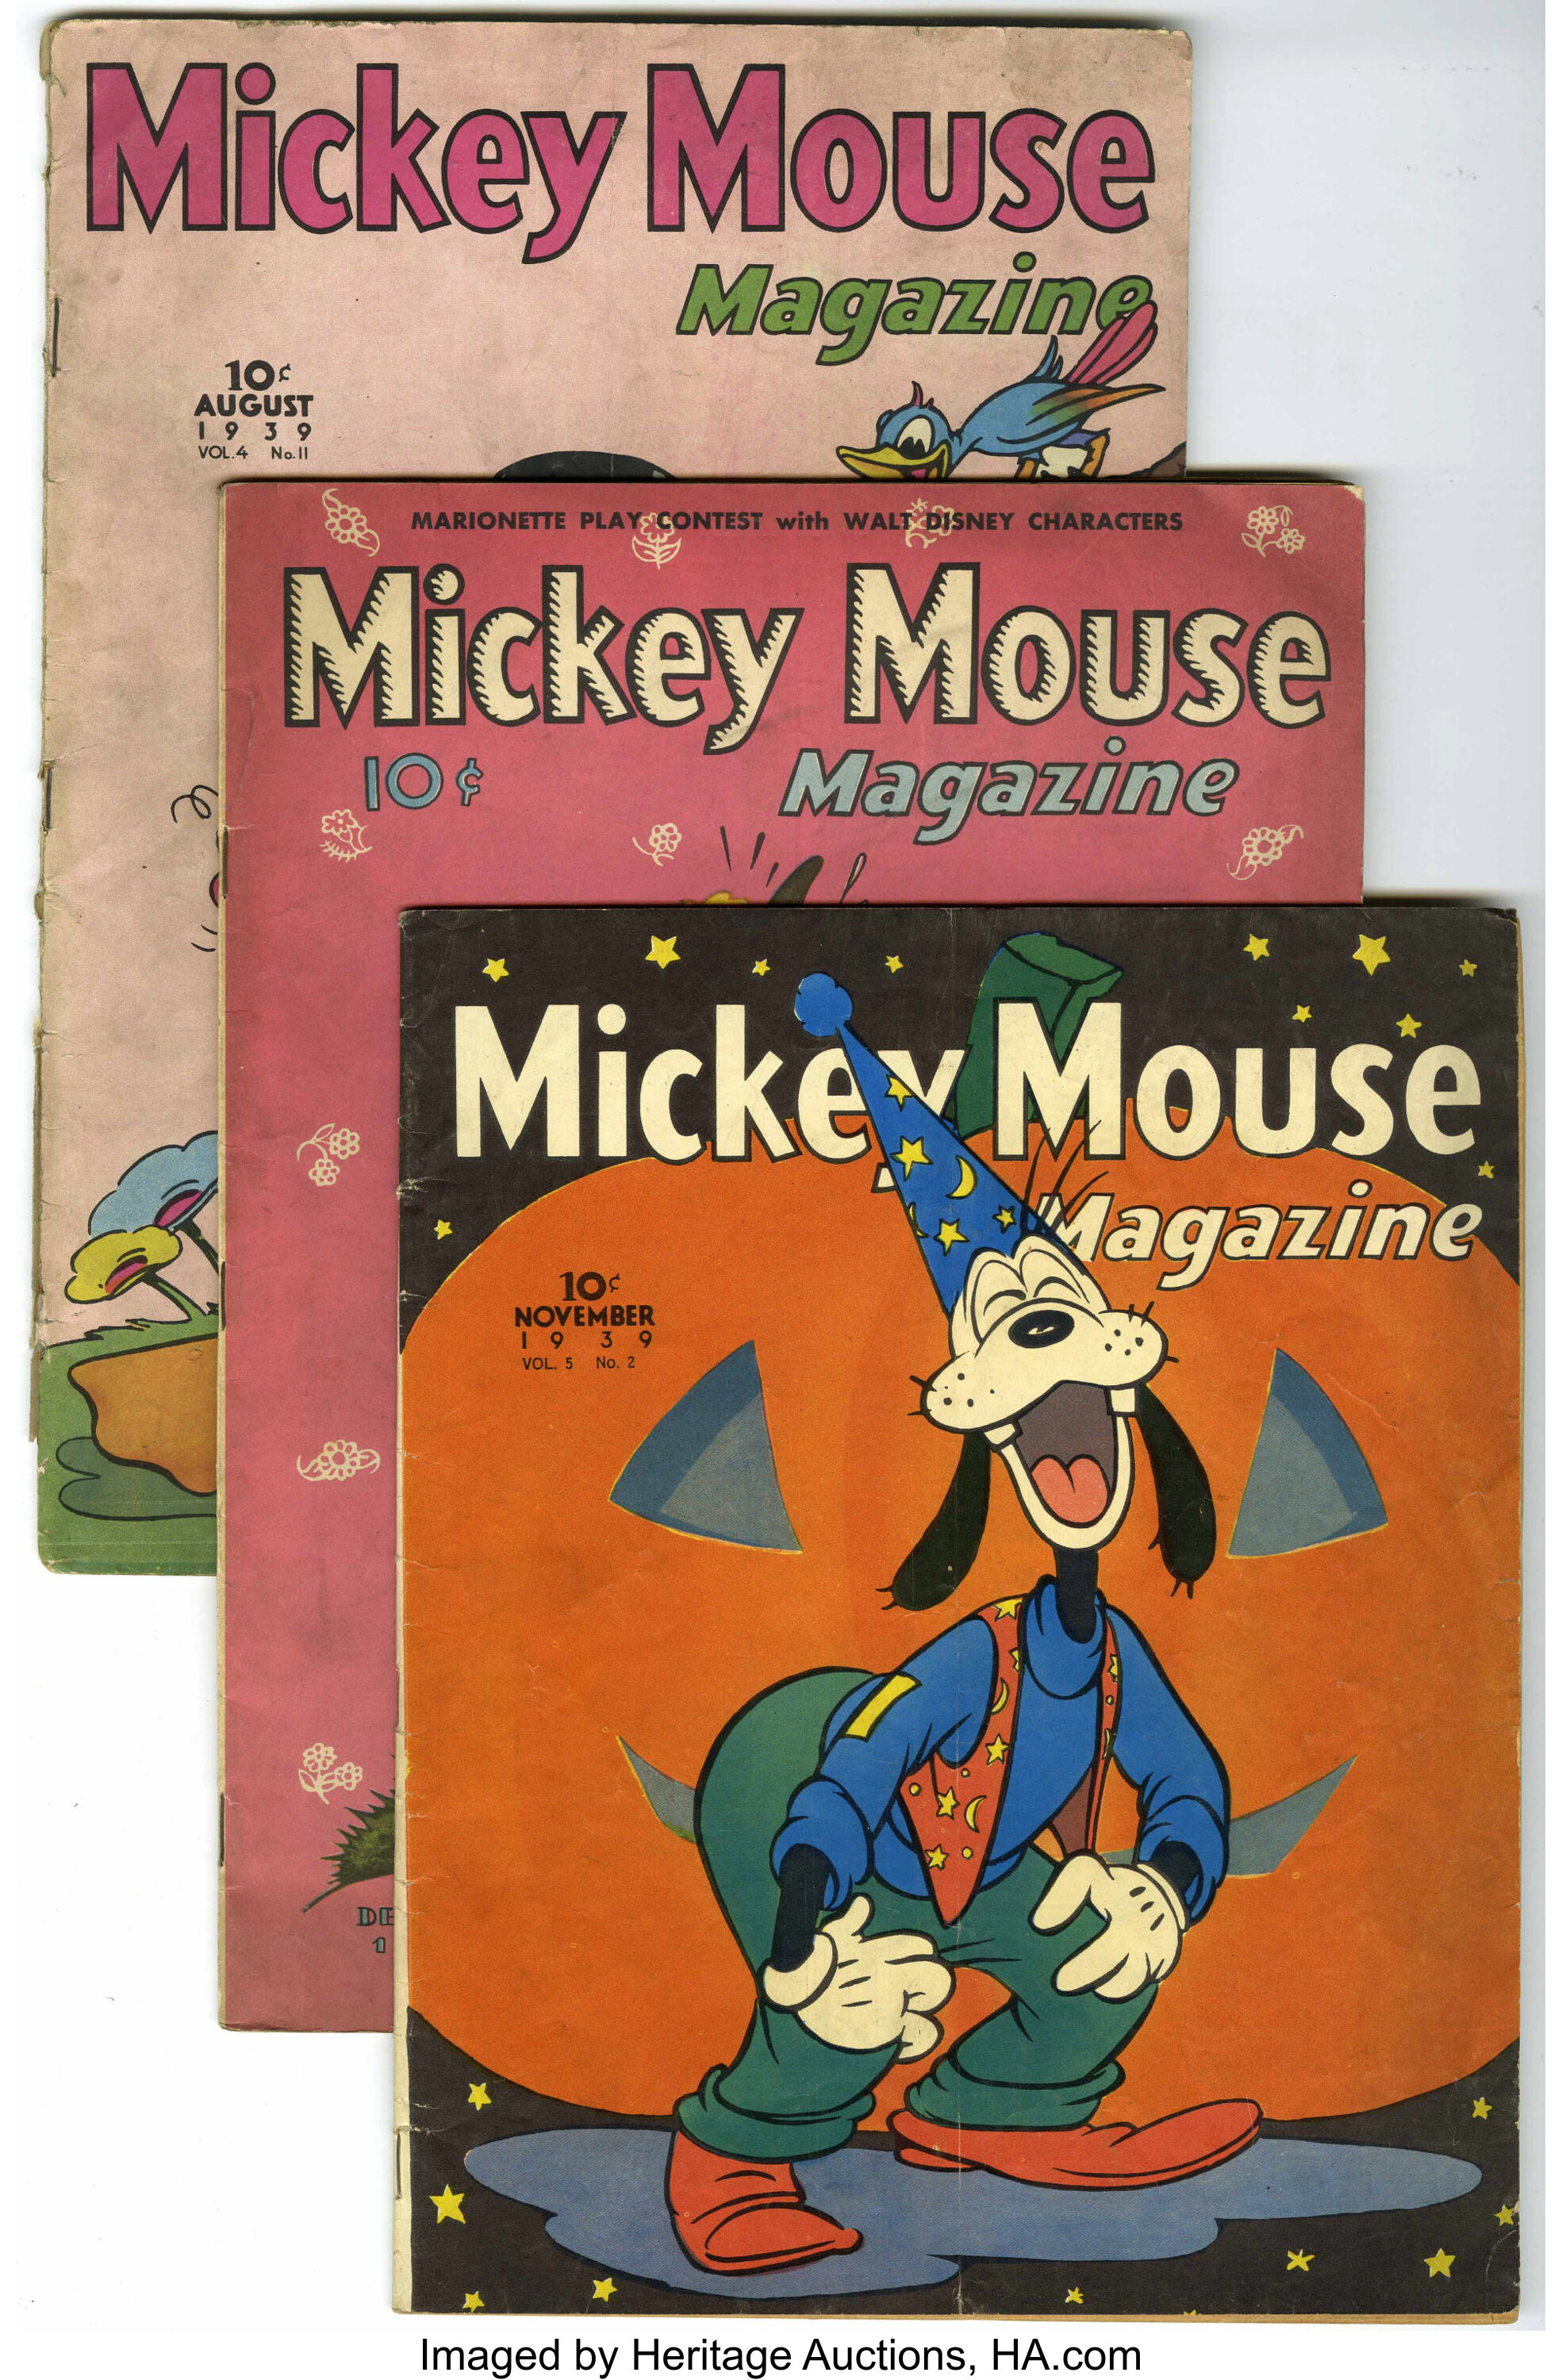 Mickey Mouse Magazine Group K K Publications Inc 1938 39 Lot Heritage Auctions